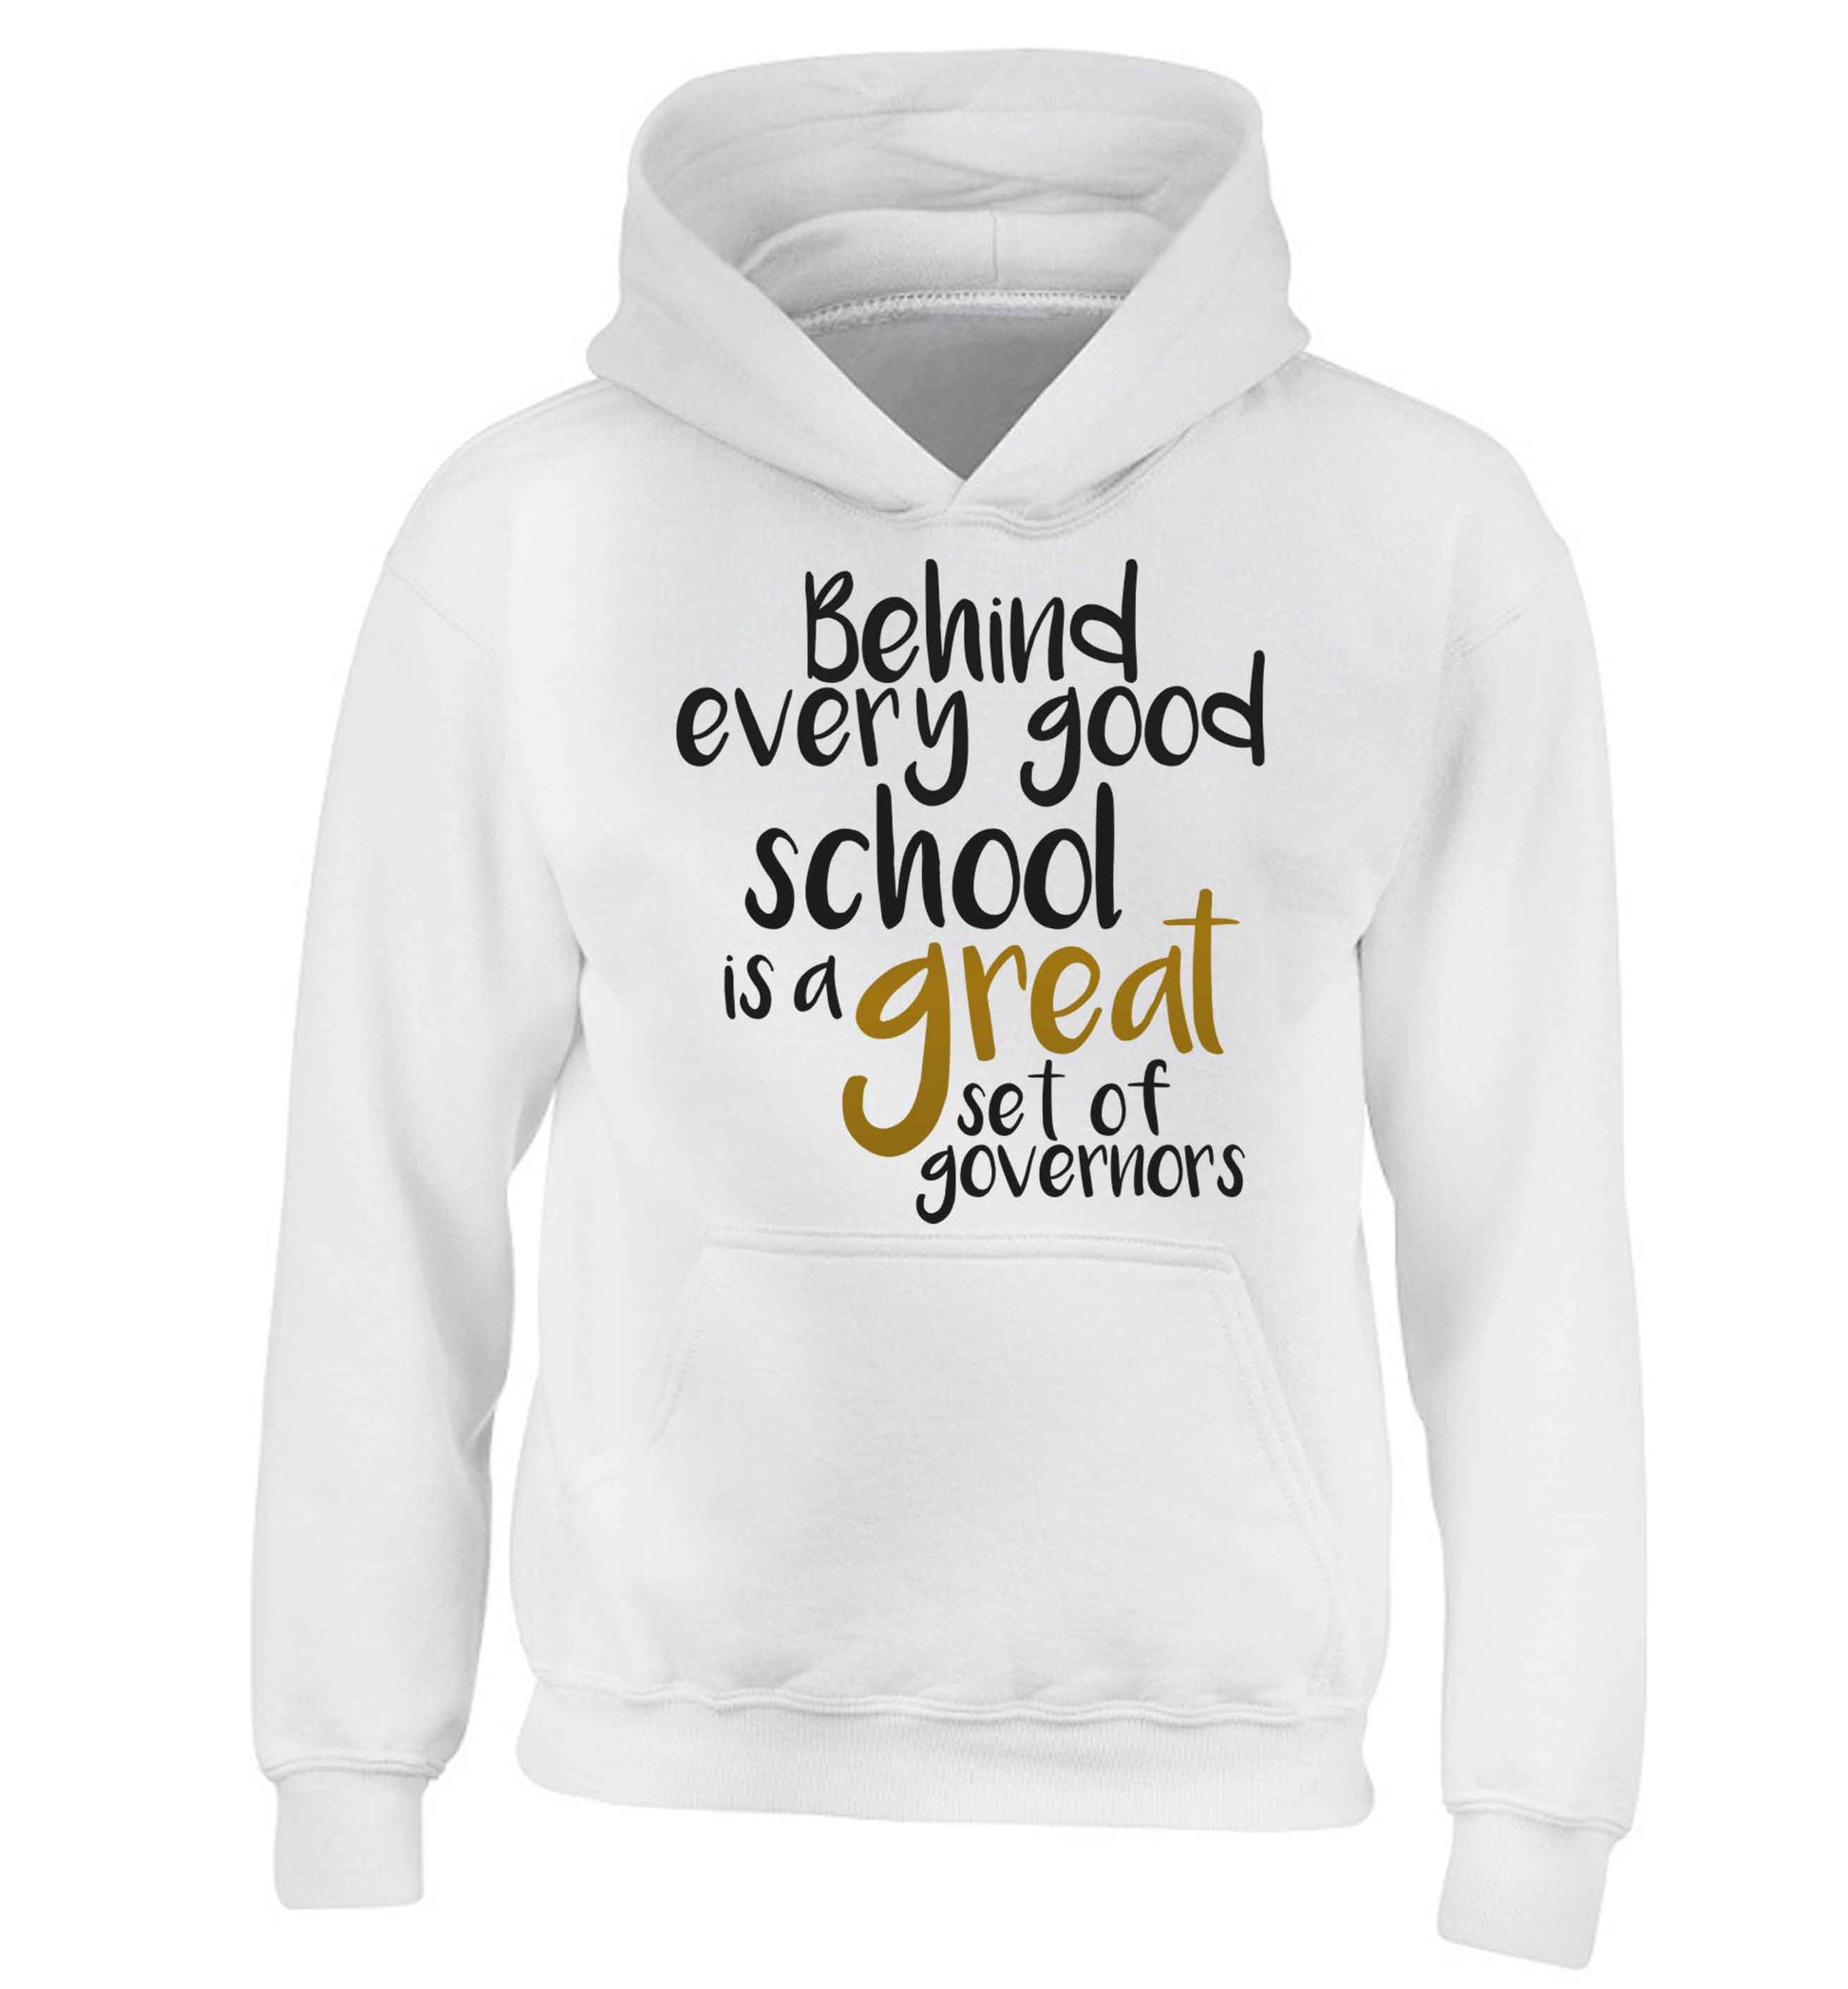 Behind every good school is a great set of governors children's white hoodie 12-13 Years